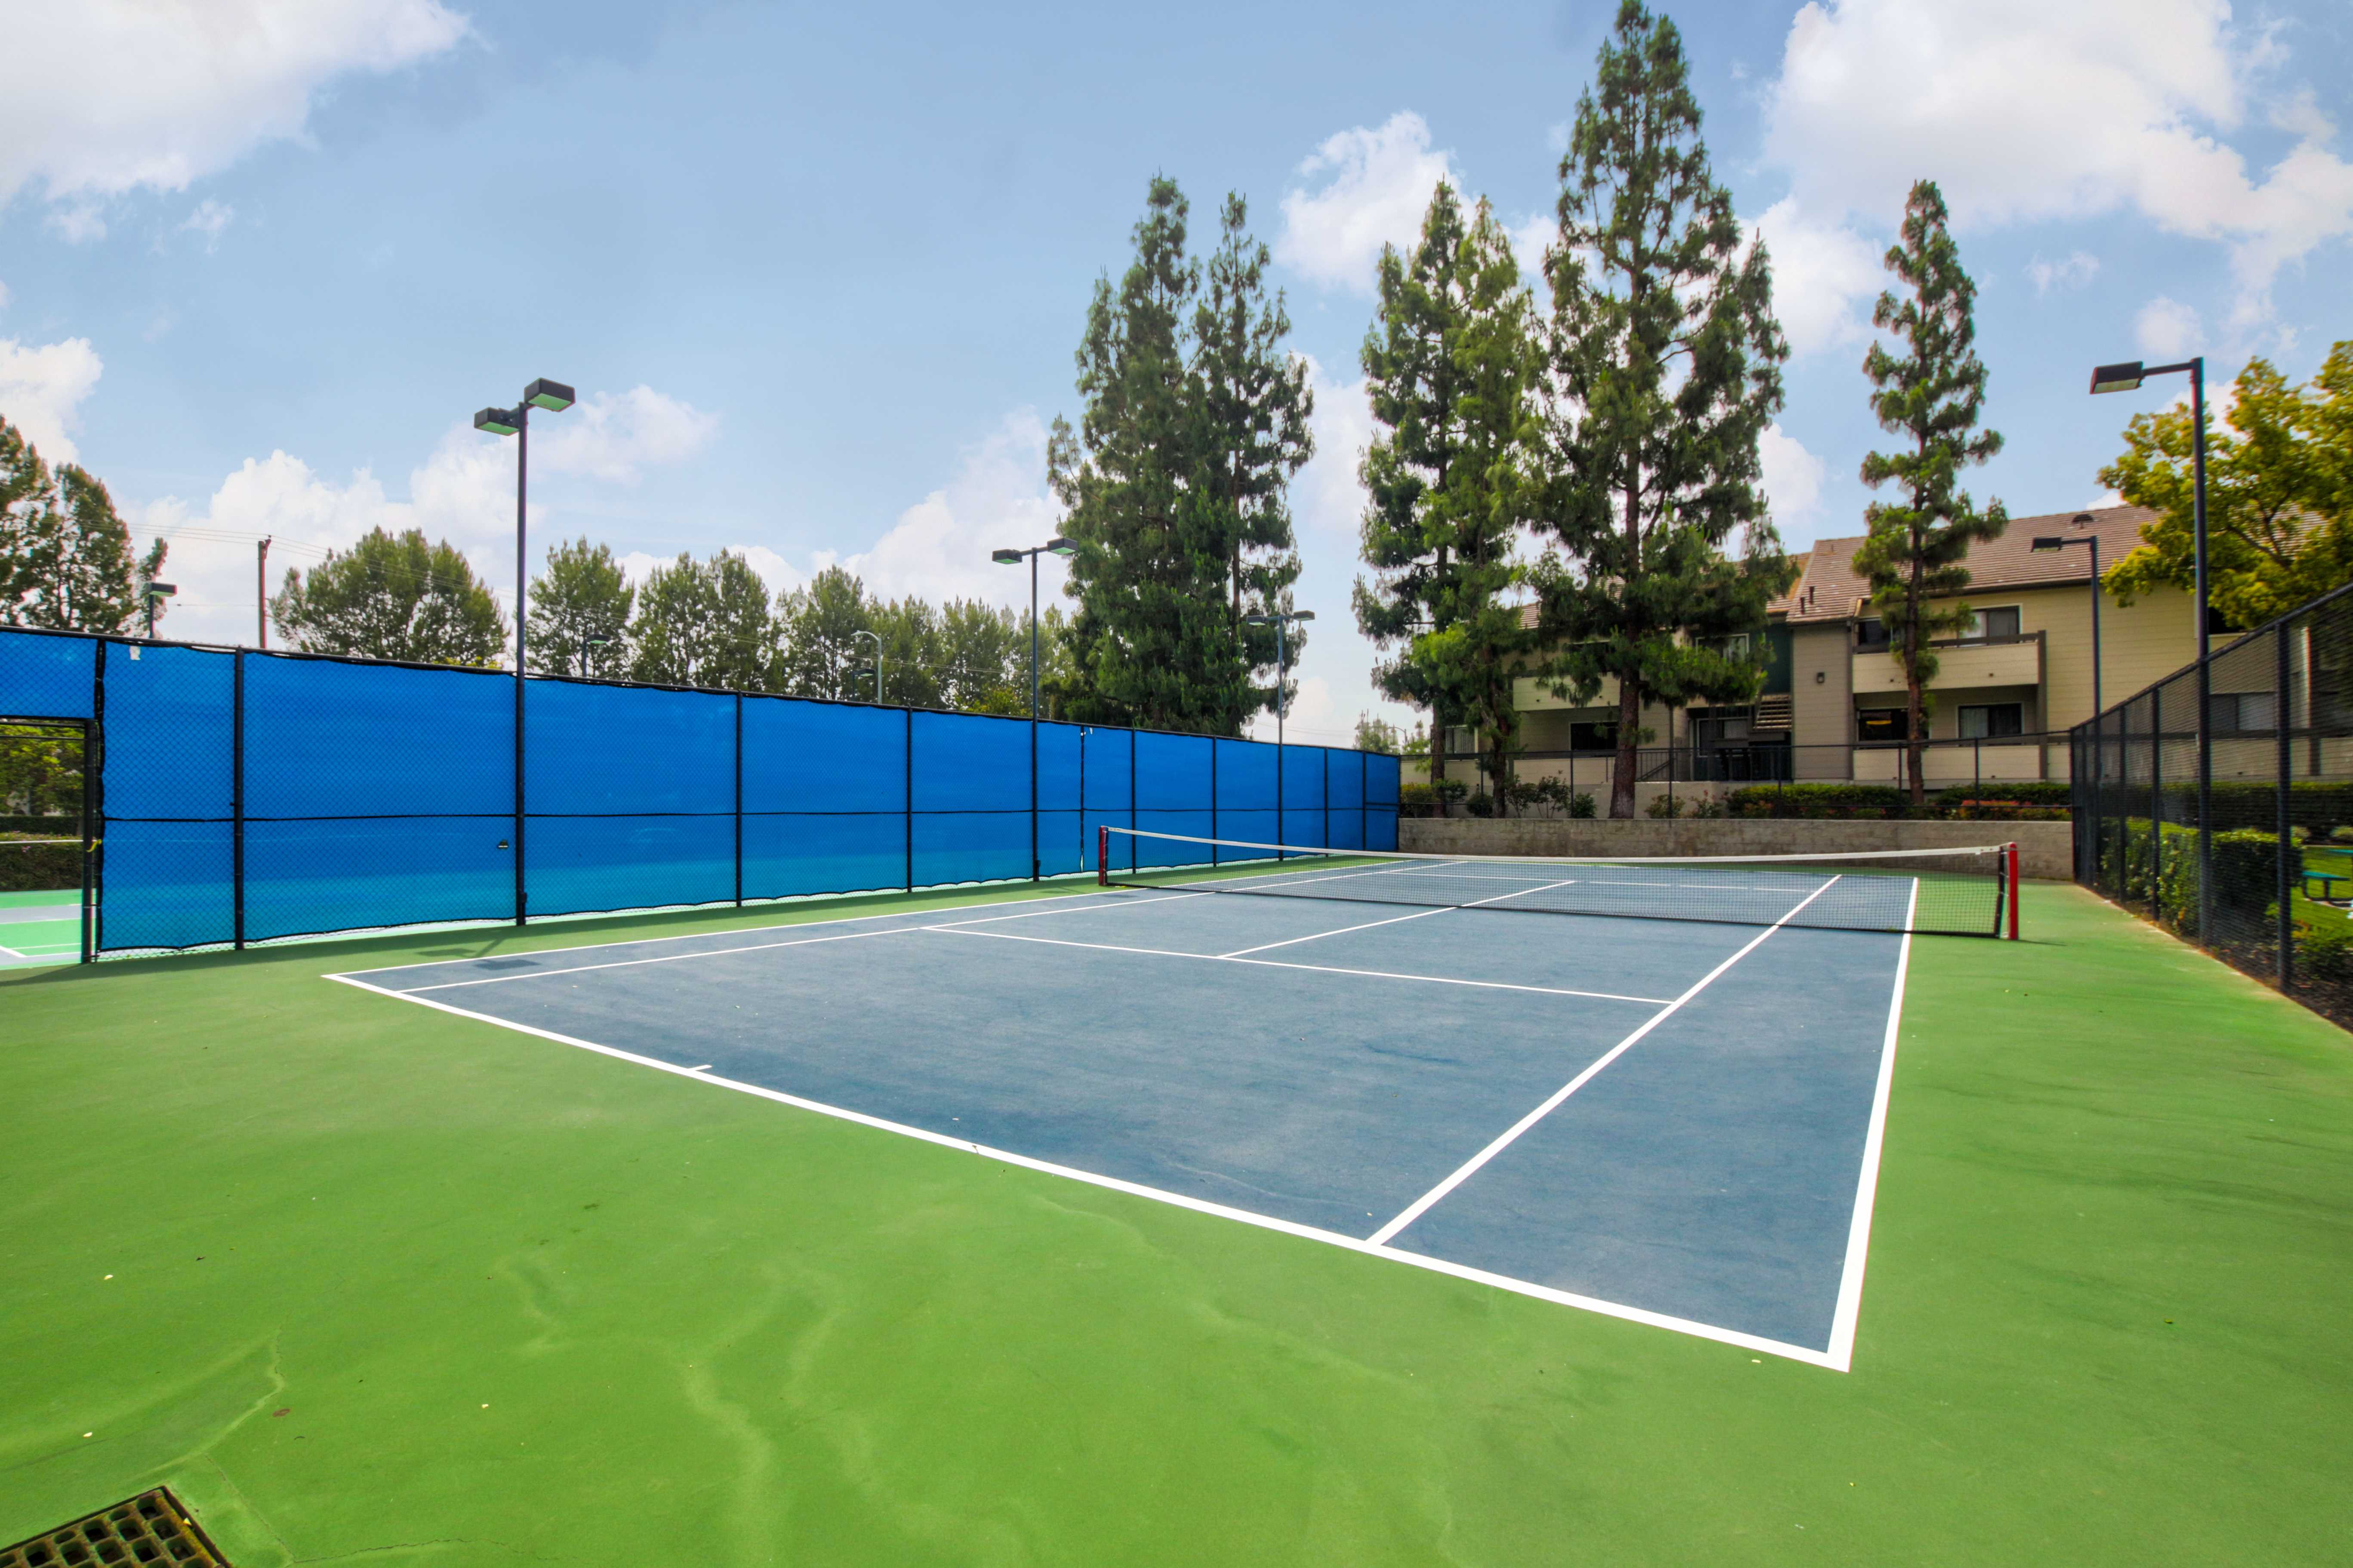 View of an outside tennis court. There are blue windscreens on the fence, and trees and bushes surround the outter part of it.